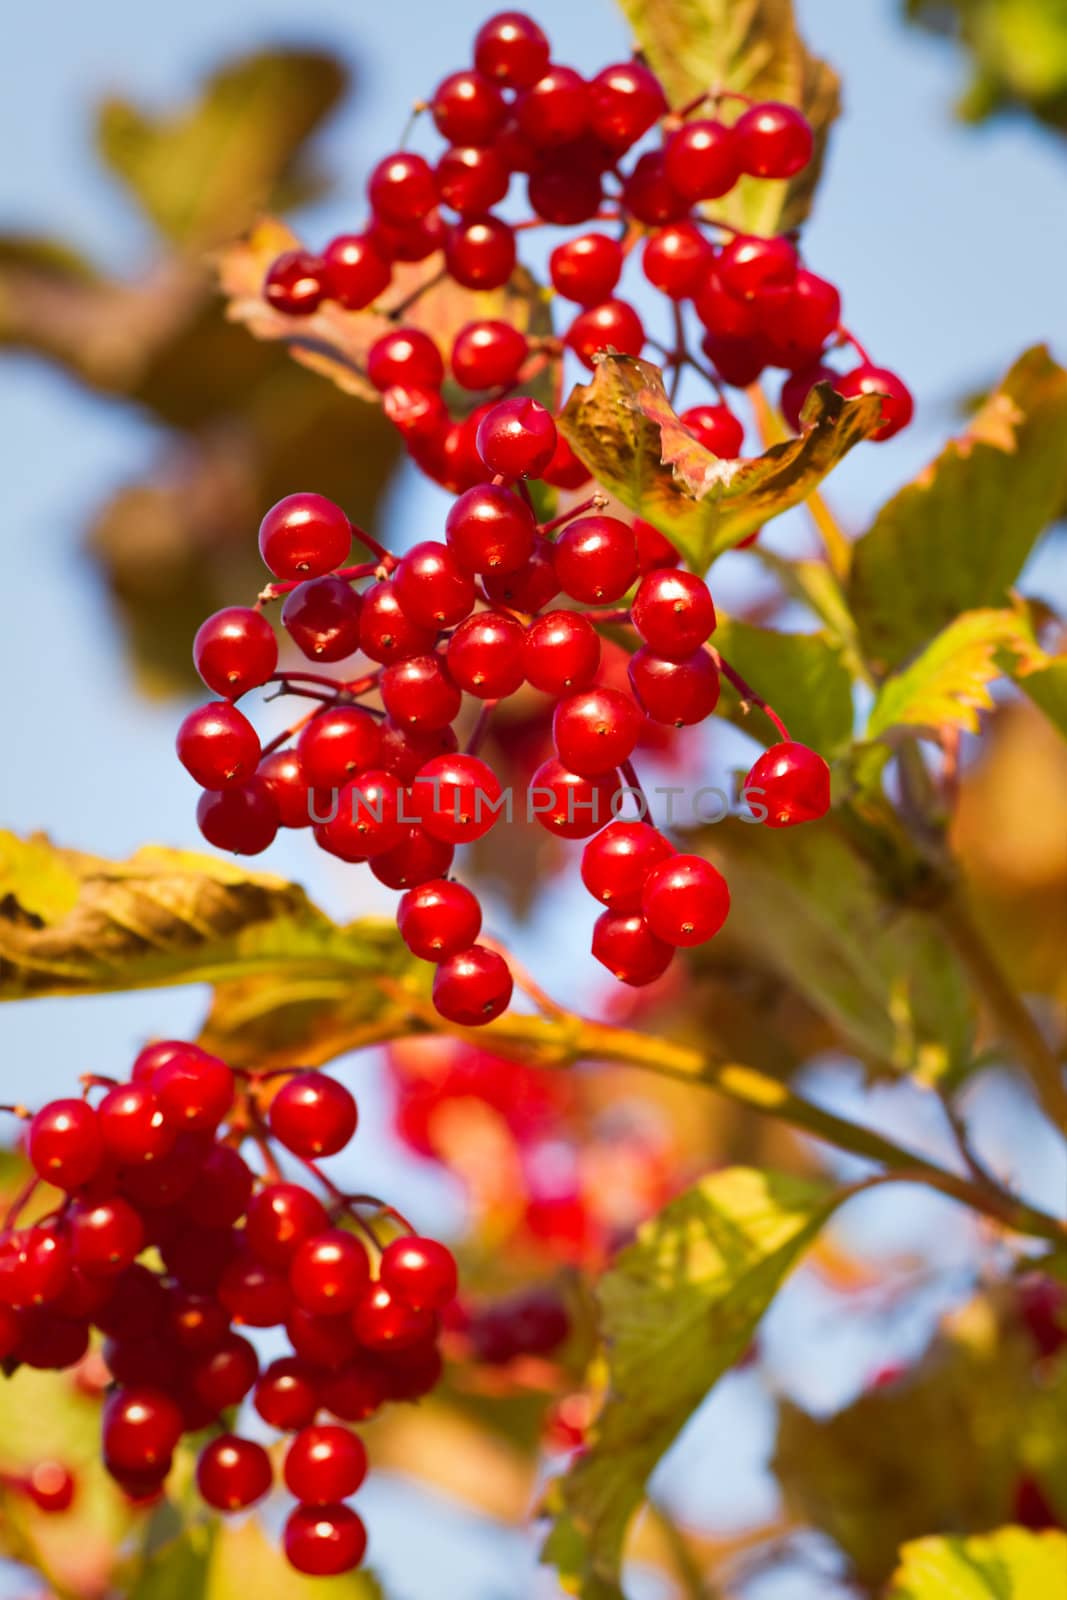 Red berries on Guelder Rose, also called Water Elder, European Cranberrybush, Cramp Bark or Snowball Tree in autumn sunshine with blue sky